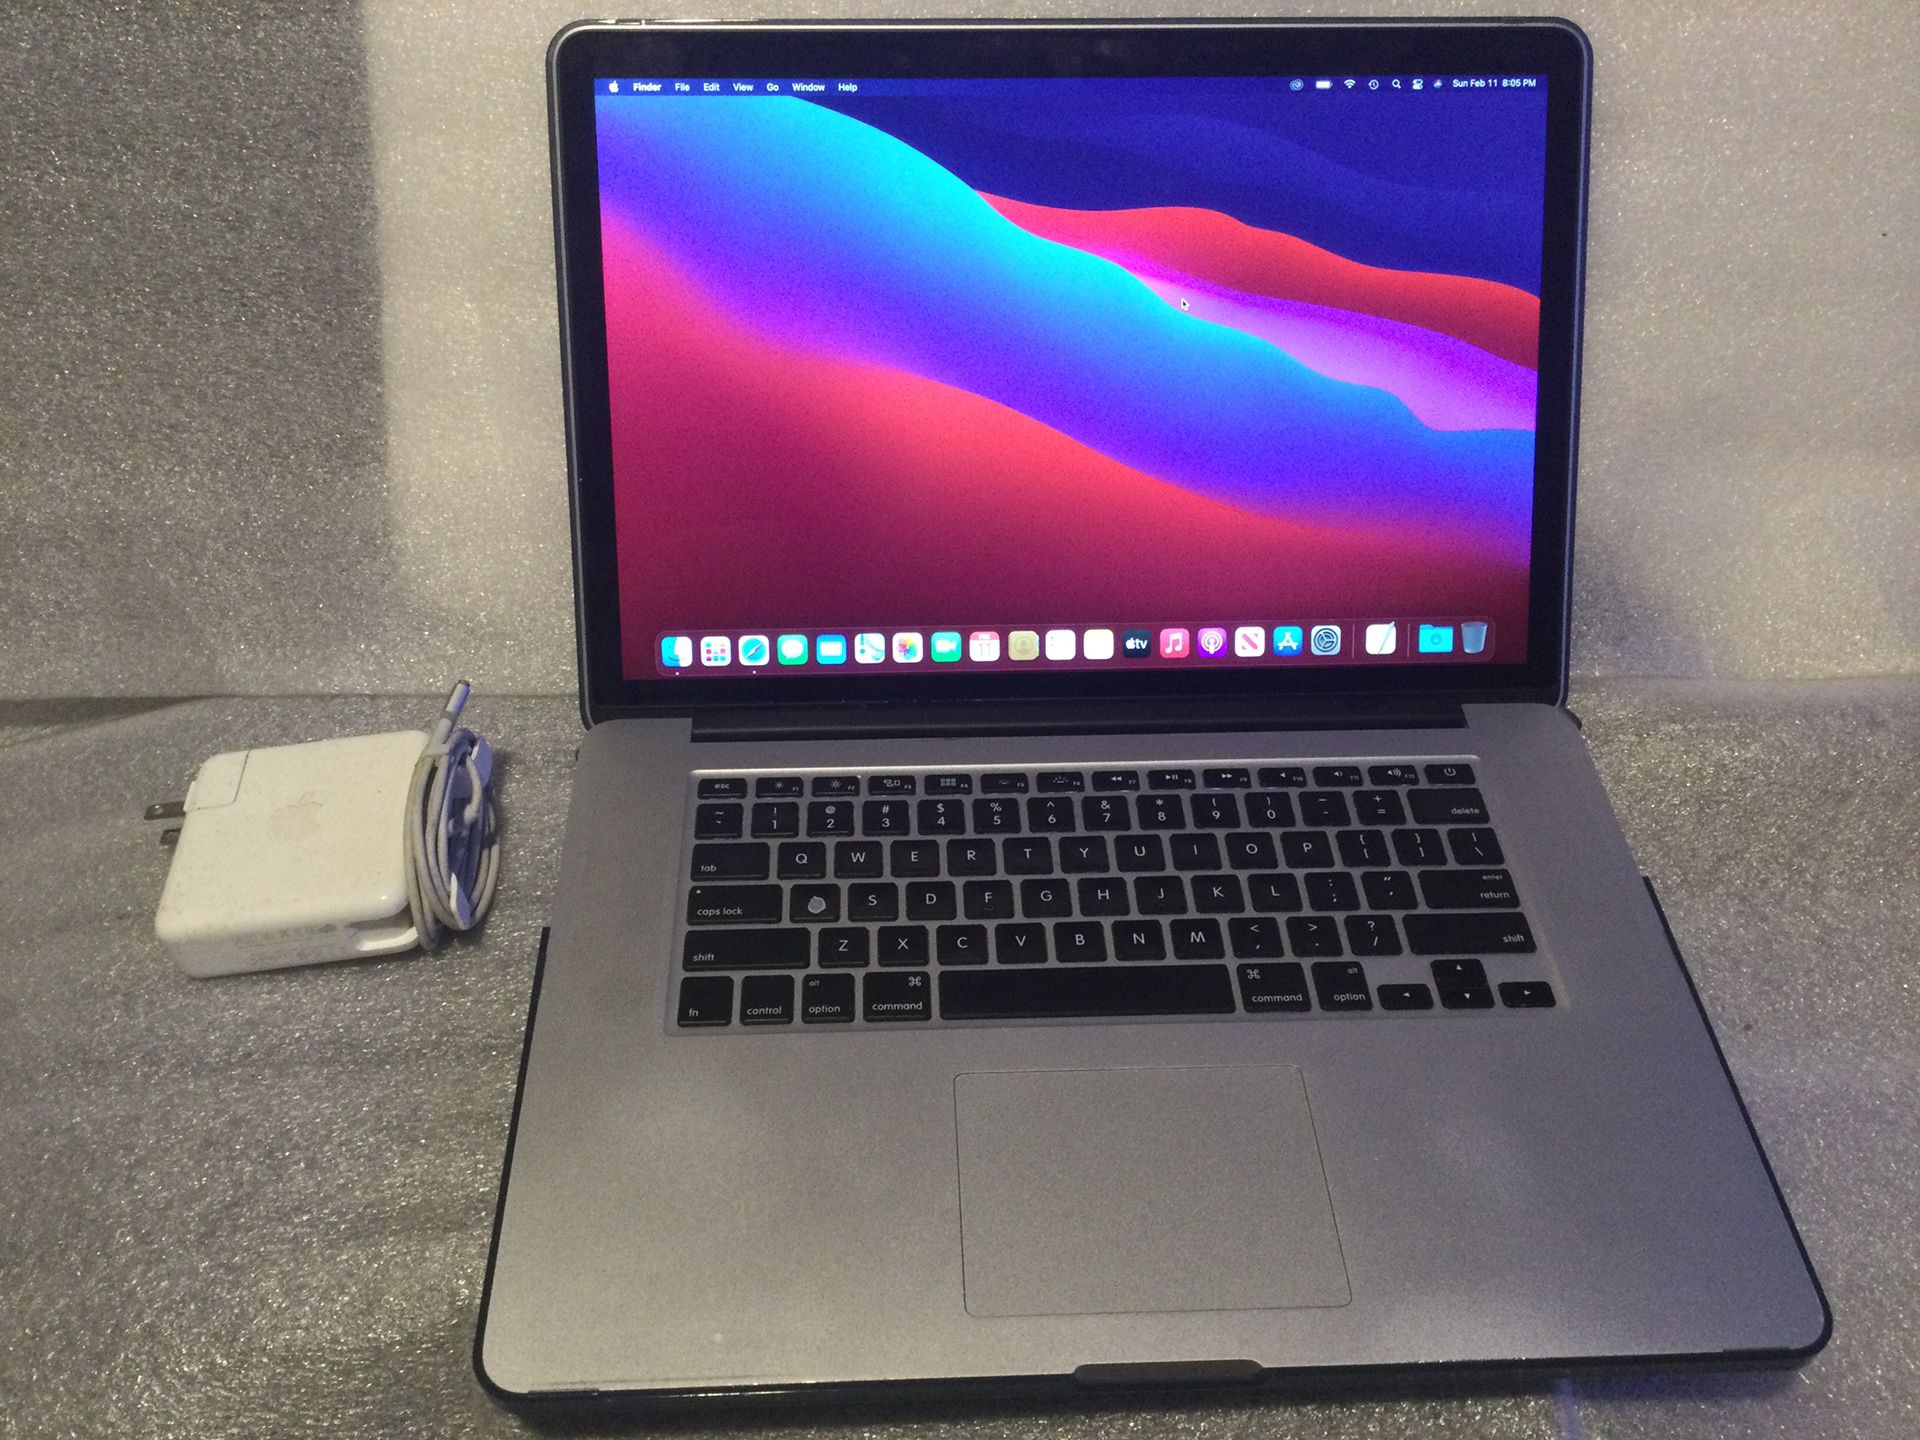 Apple 15" MacBook Pro i7 2.2GHz 16Gb Ram 500Gb Fully Loaded for all use.